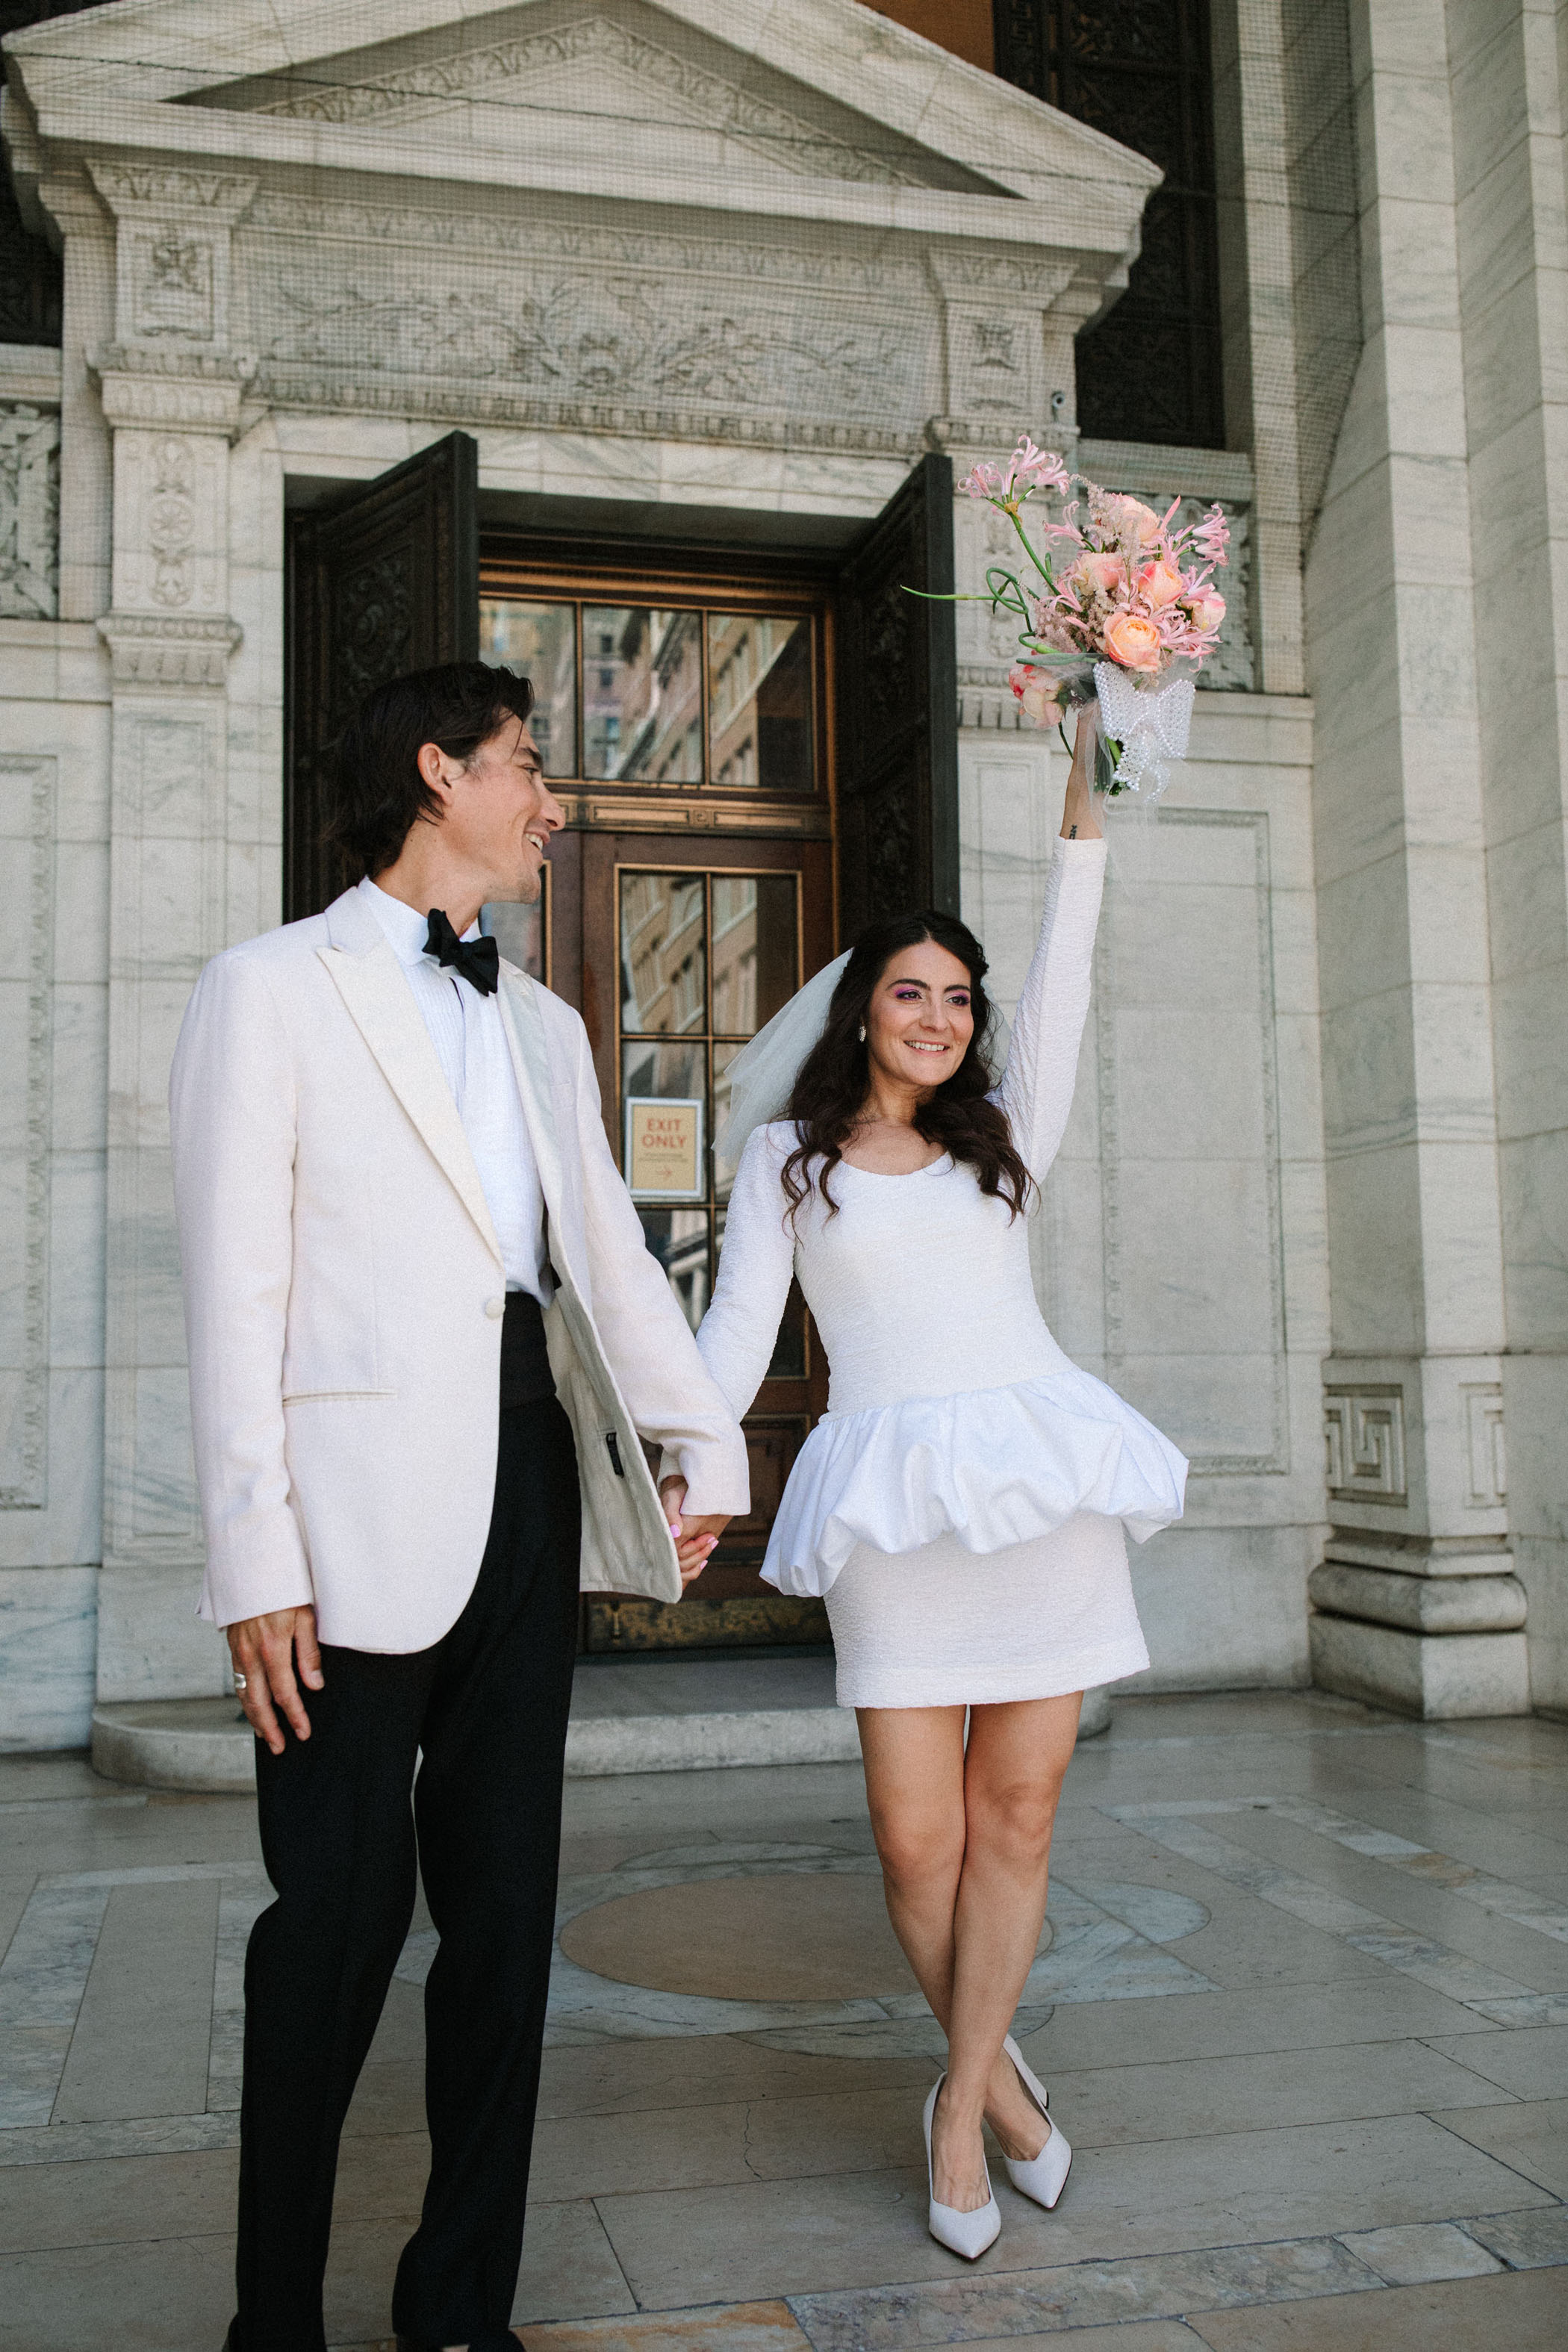 Las Vegas Inspired Elopement at the Plaza Hotel NYCLas Vegas Inspired Elopement at the Plaza Hotel NYCLas Vegas Inspired Elopement at the Plaza Hotel NYC